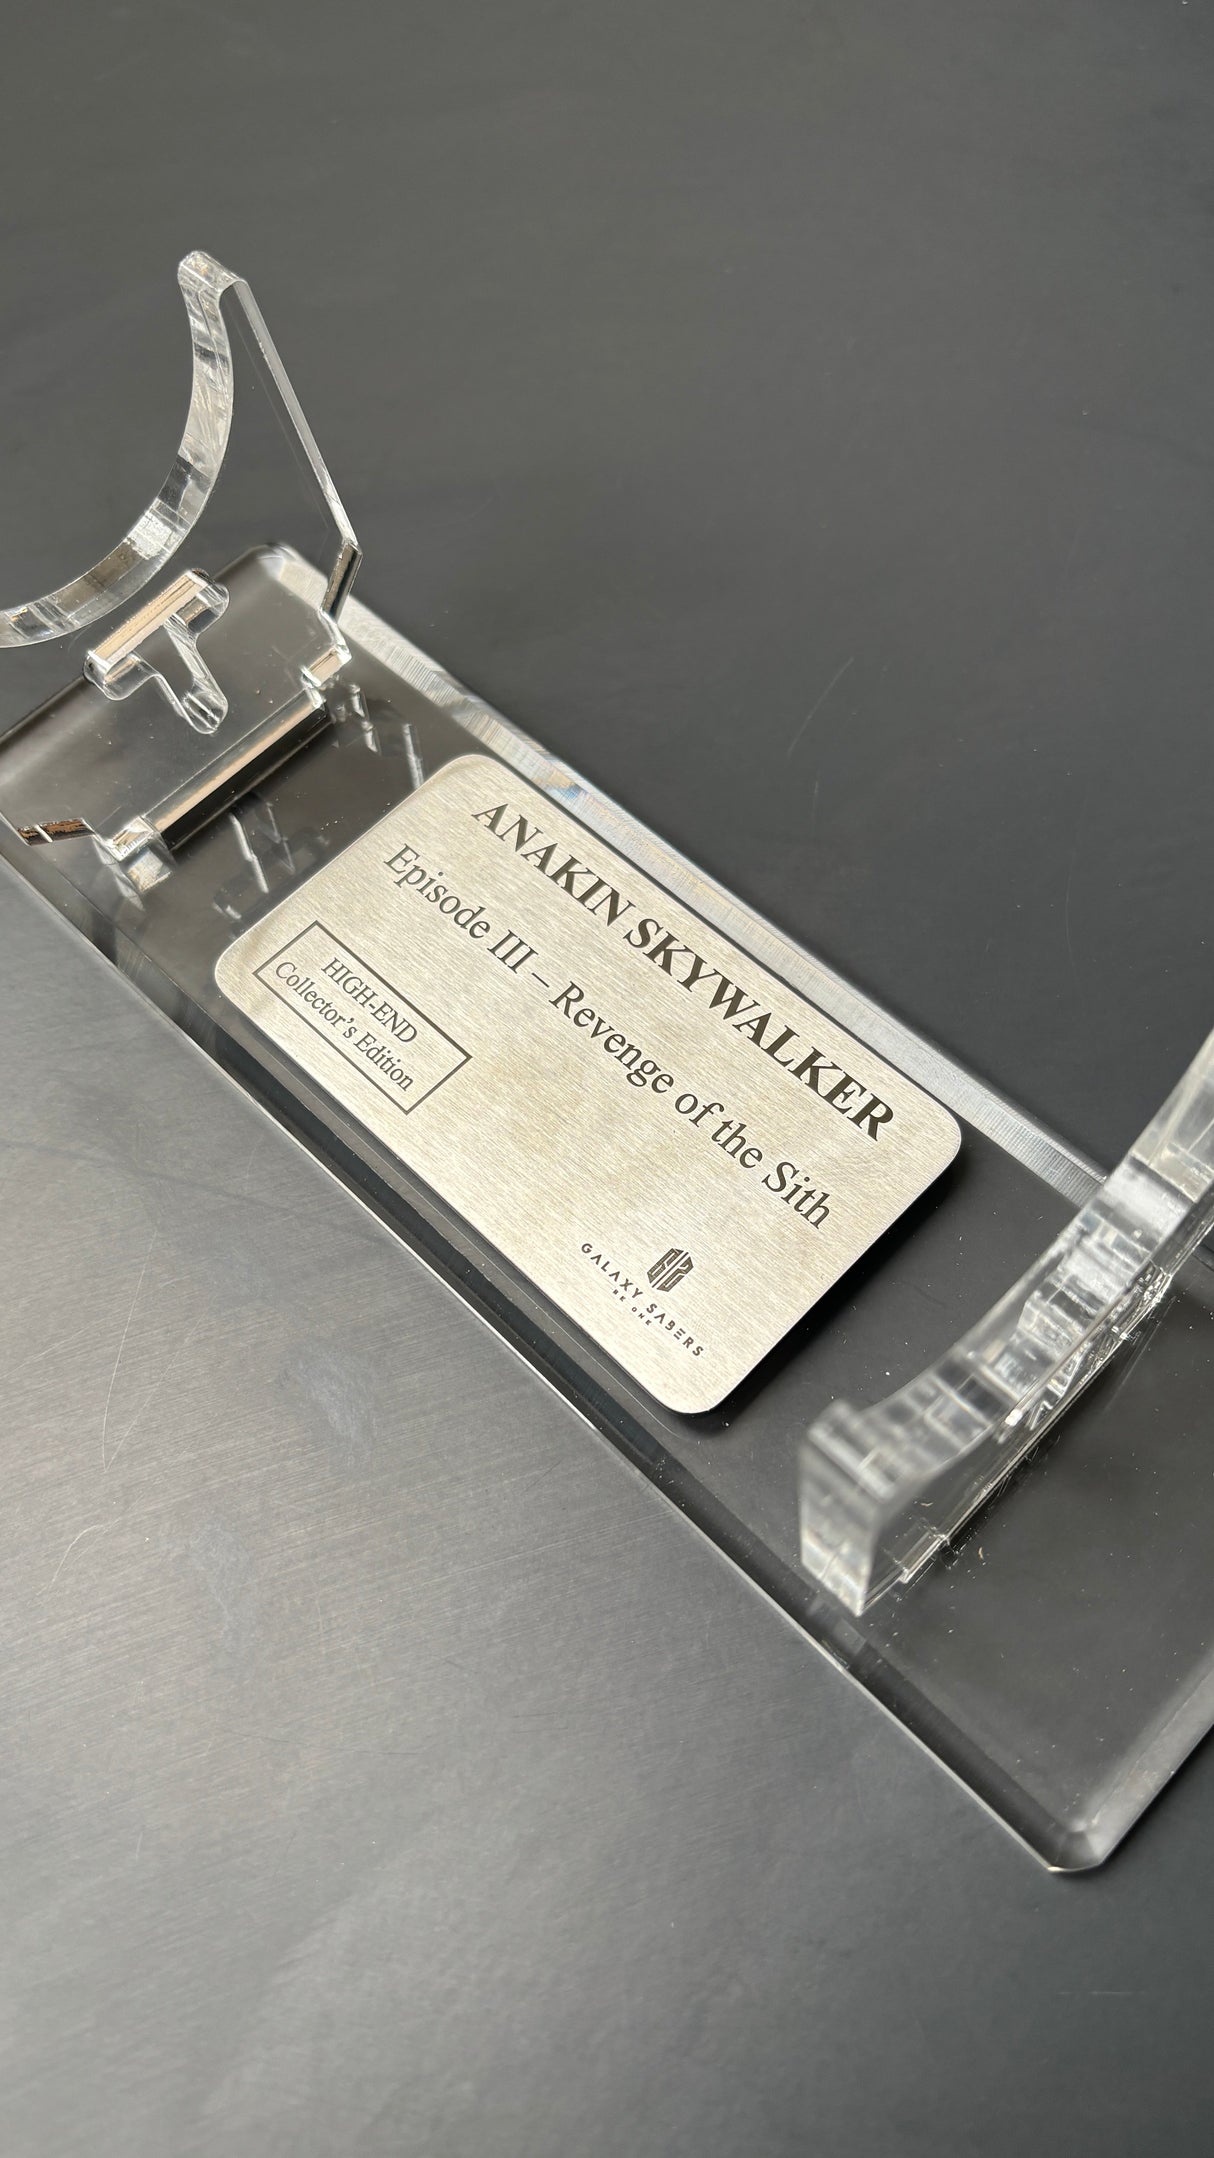 Display Stand & Engraved Plaque